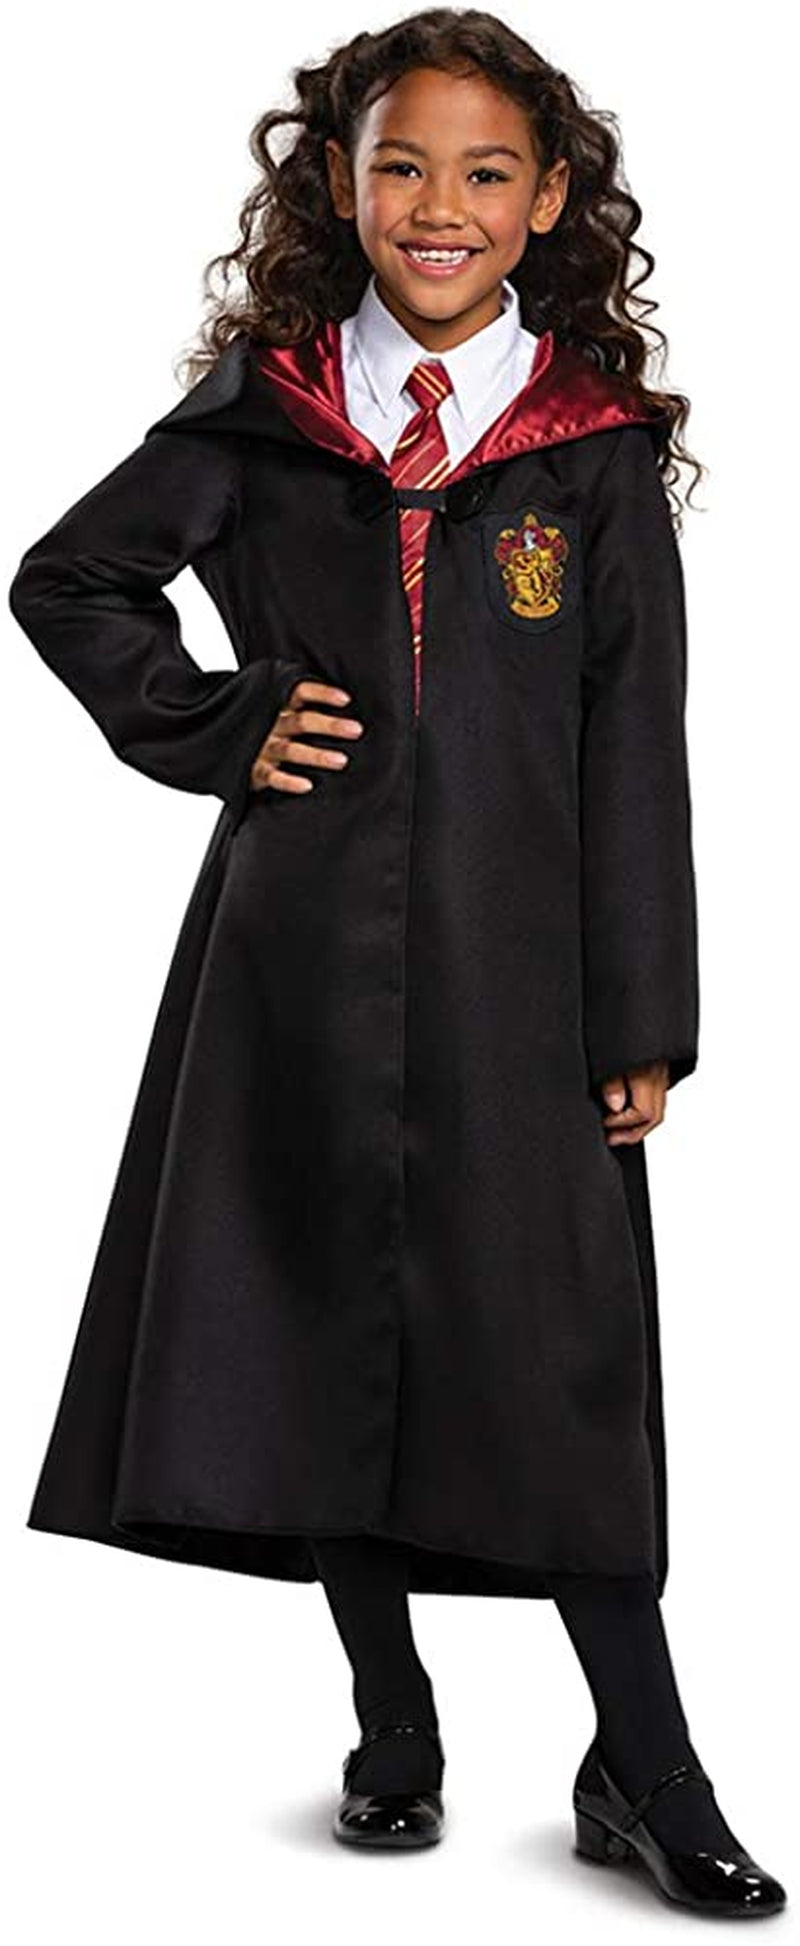 Harry Potter Robe, Official Hogwarts Wizarding World Costume Robes, Classic Kids Size Dress up Accessory  Disguise   